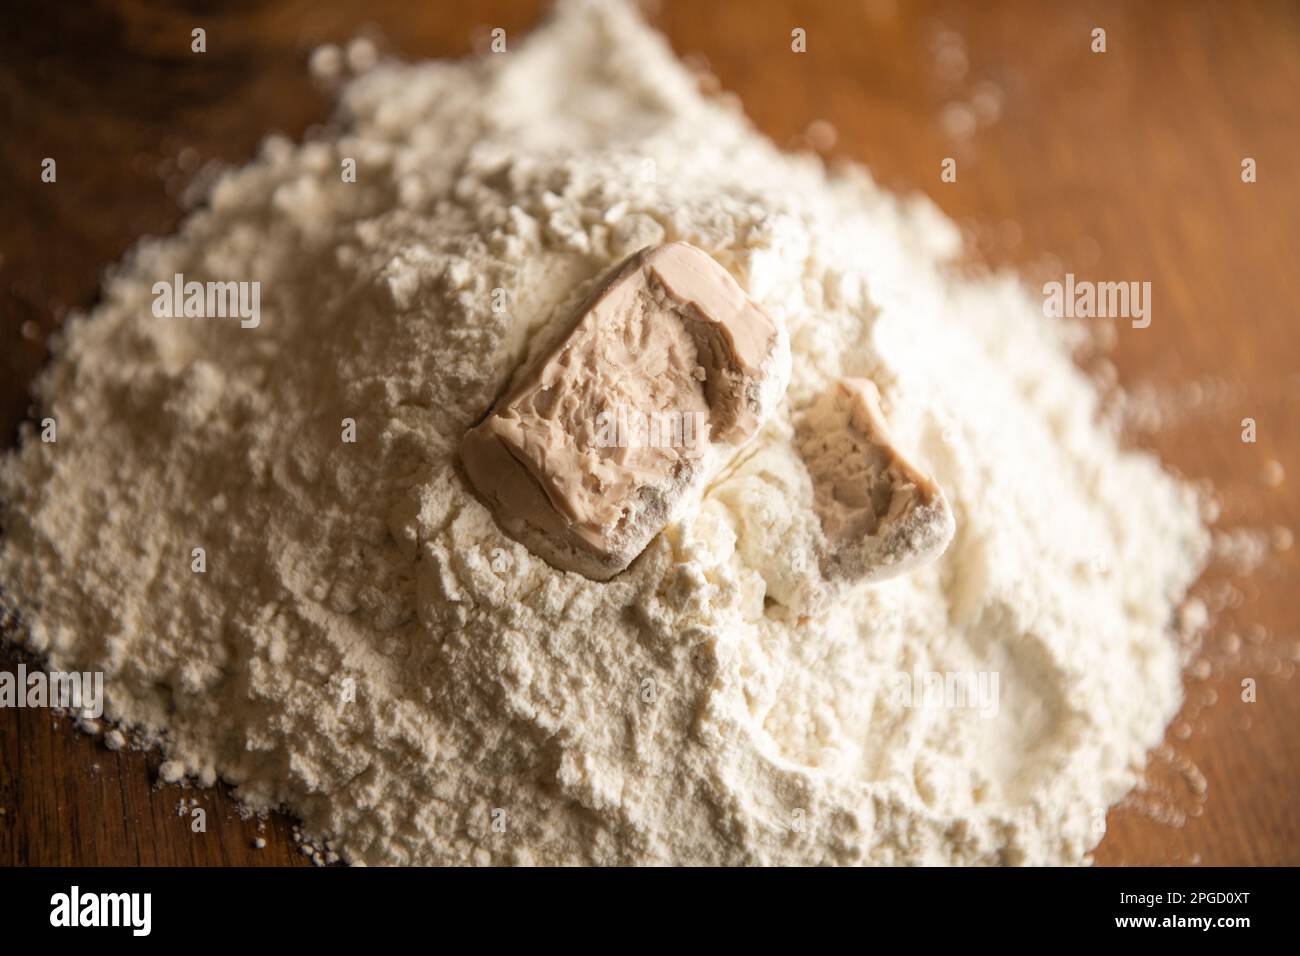 A cube of  yeast crumbled on the flour Stock Photo